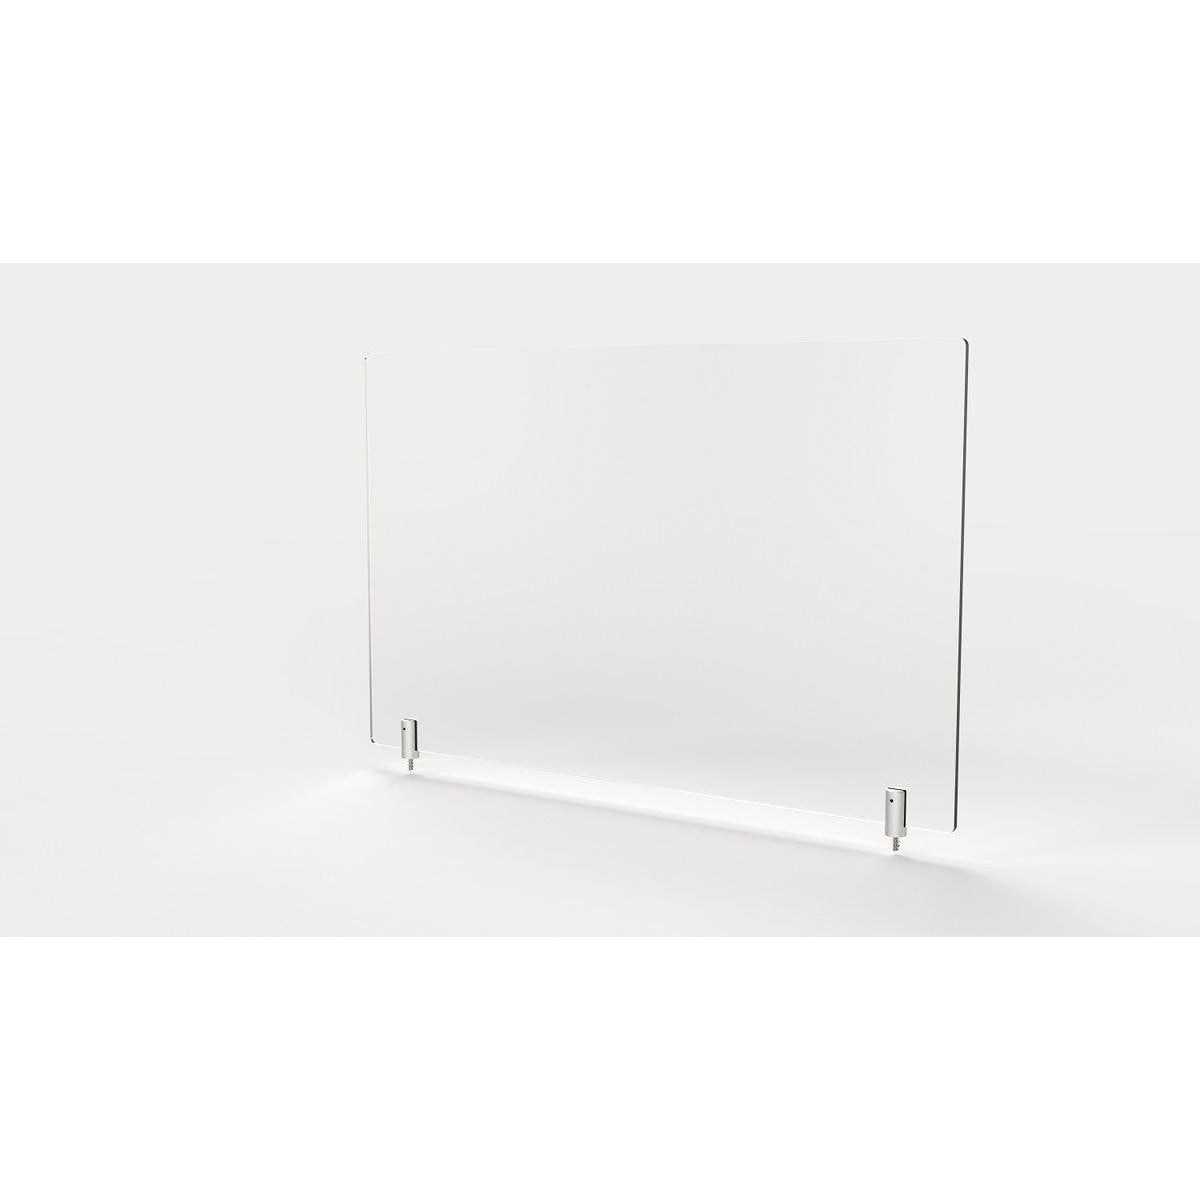 Frosted Thermoplastic Partition & Cubicle Extender with Permanent Screw Attachment, 18"H x 29"W